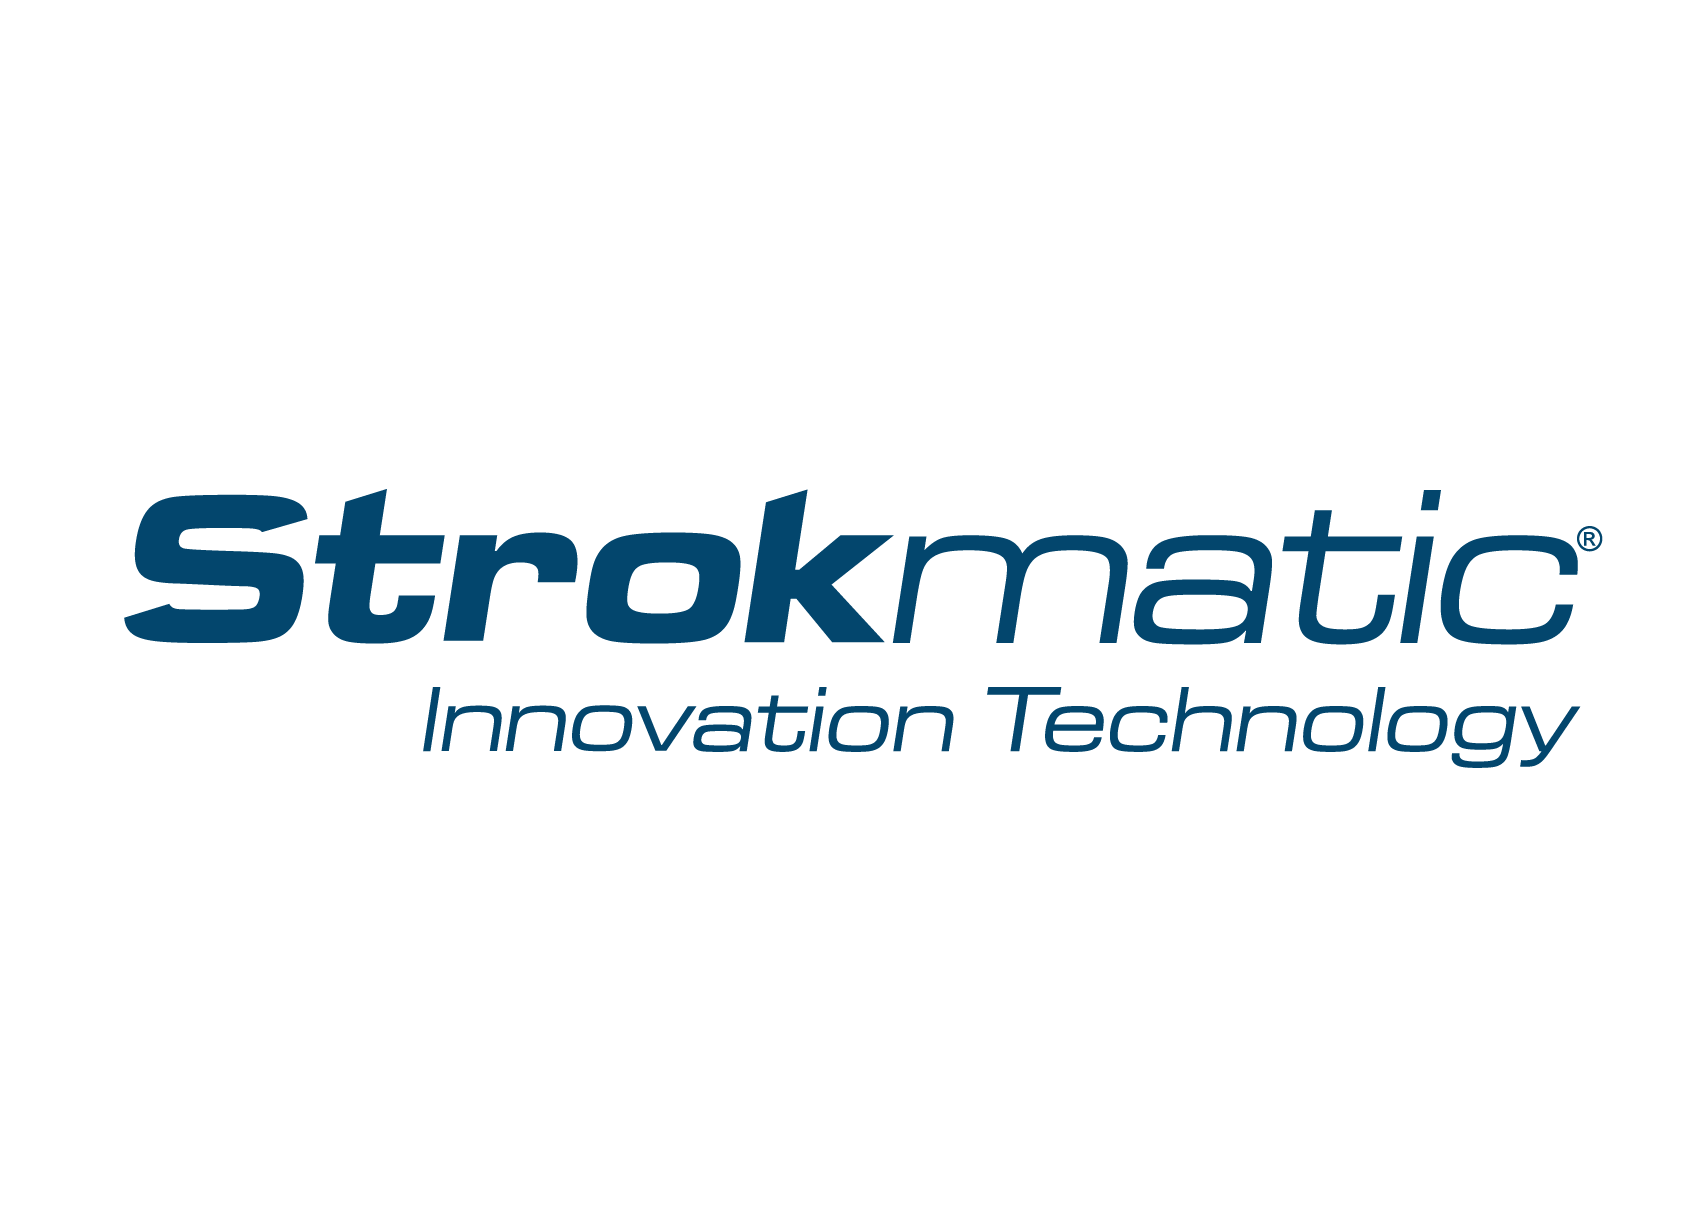 Strokmatic innovation technology